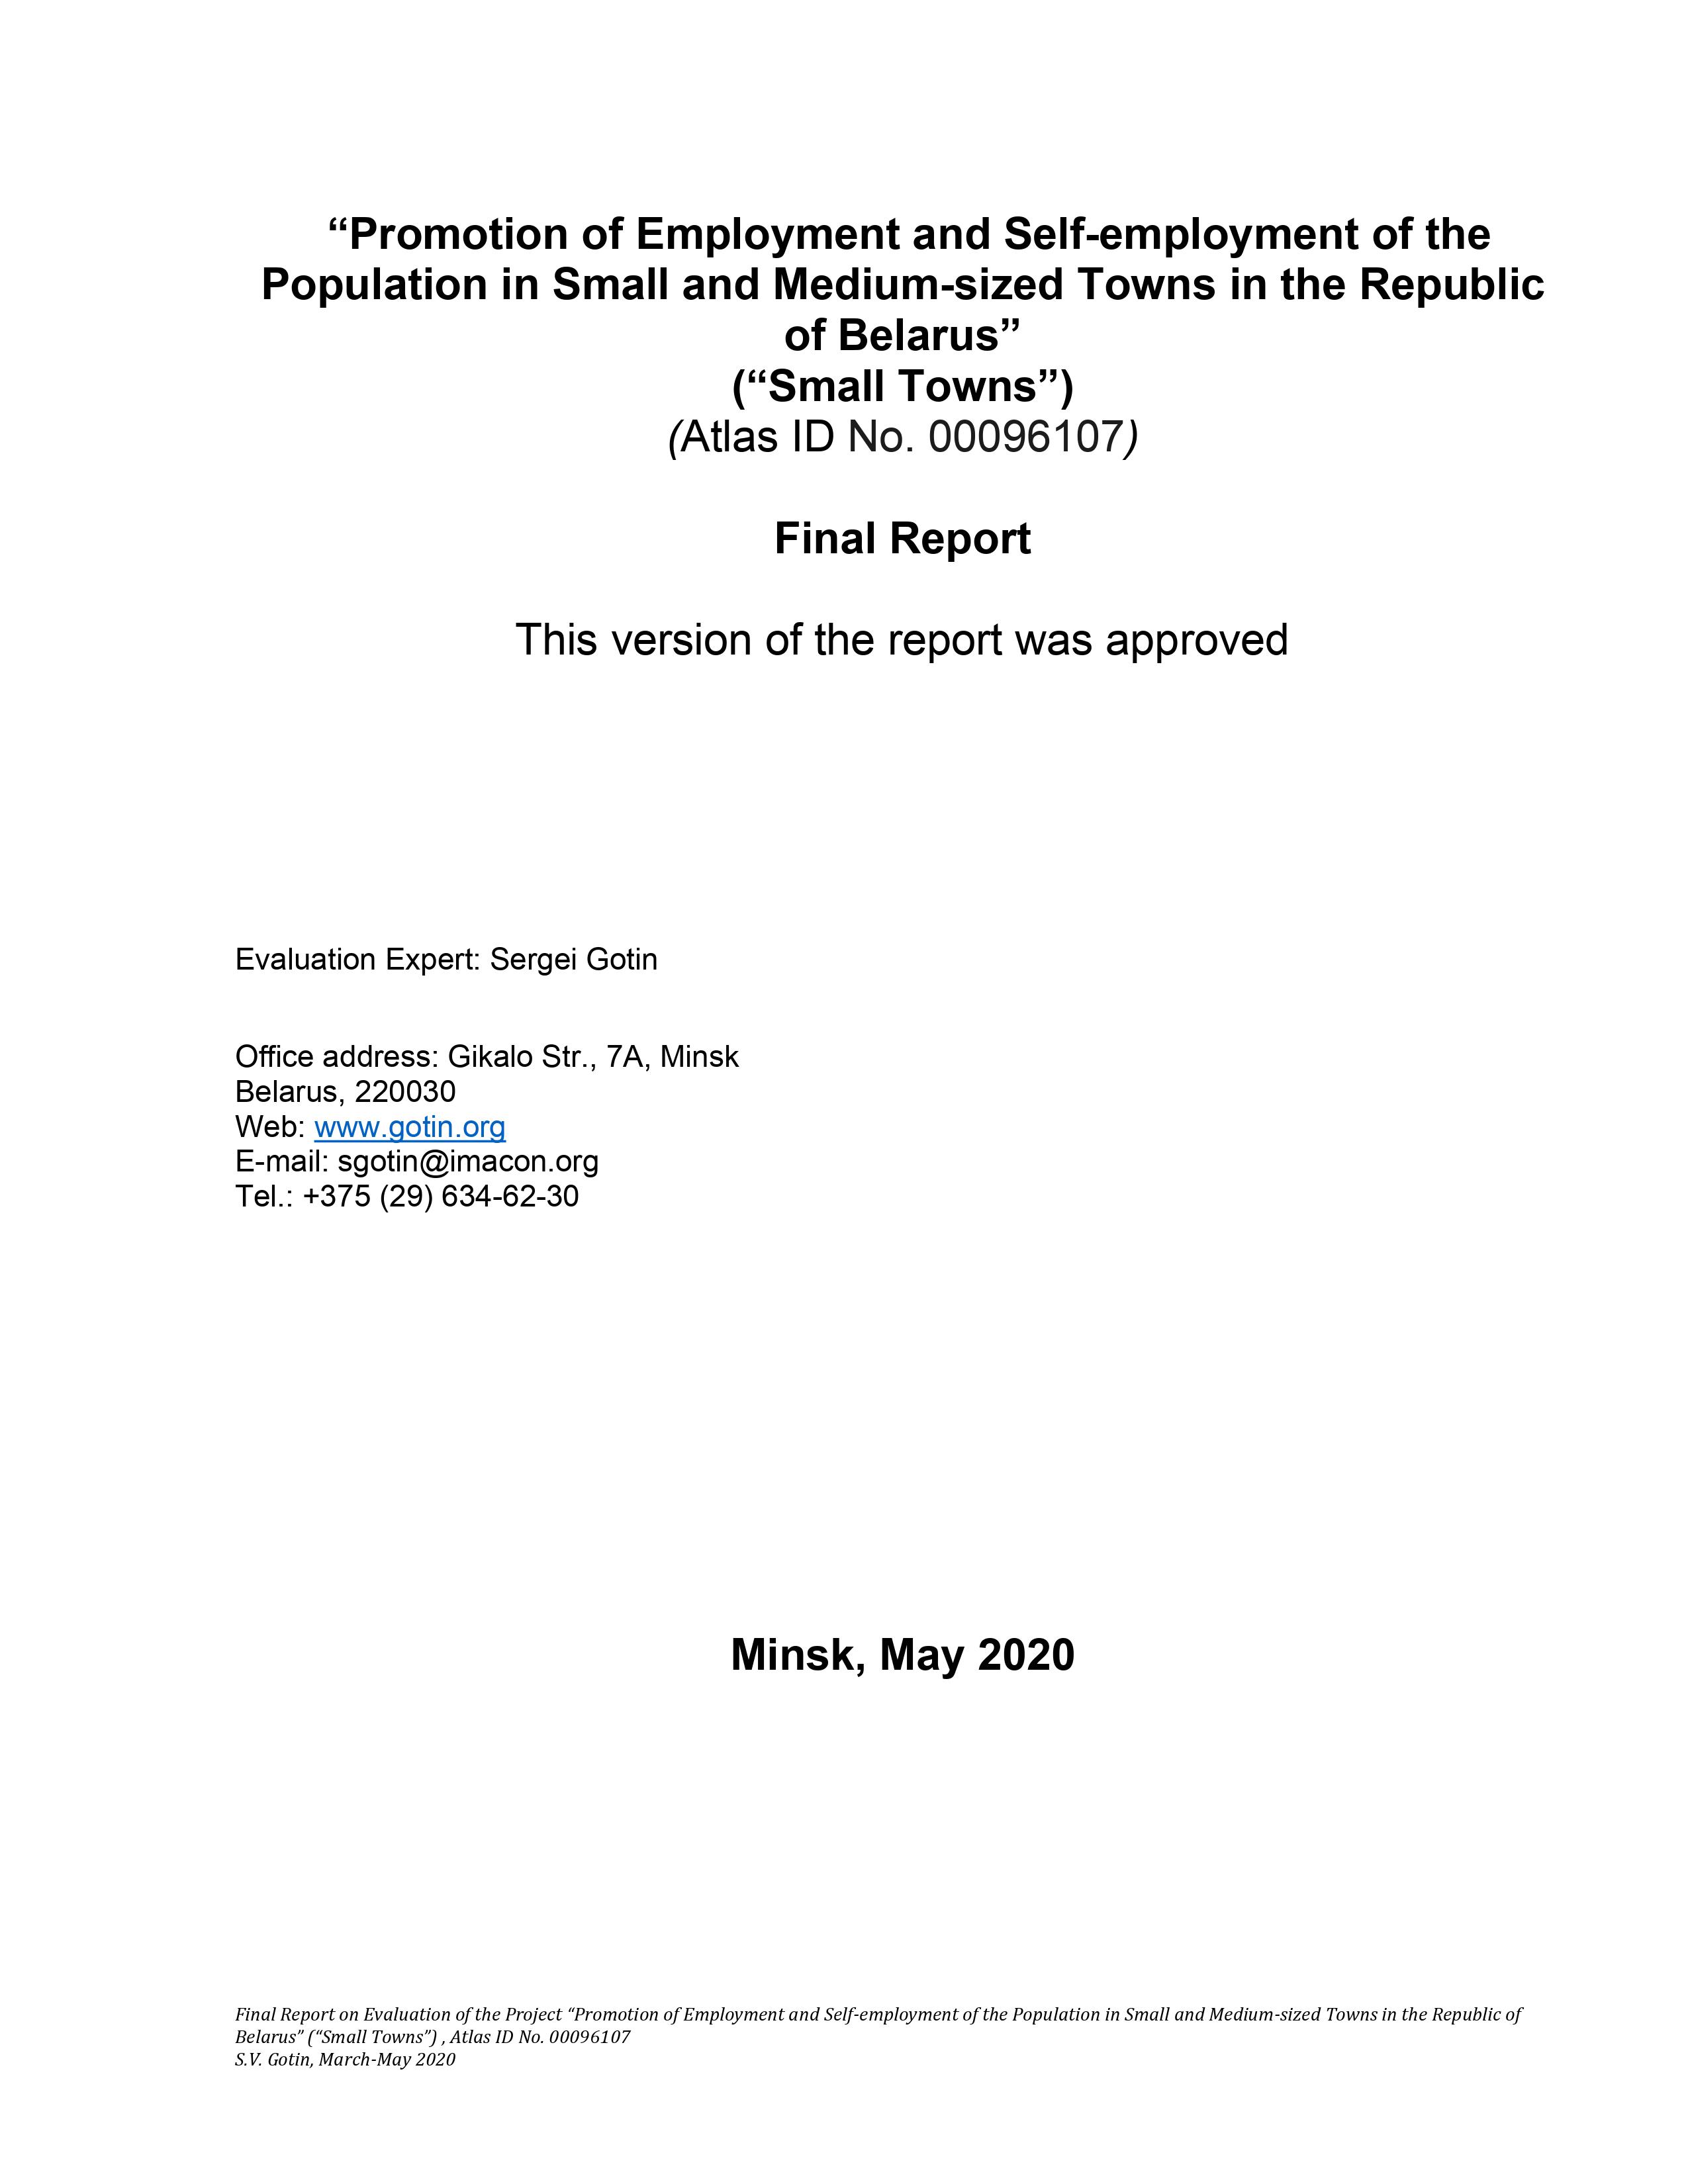 Promotion of employment and self-employment of the population in small and medium-sized towns in the Republic of Belarus, FInal report